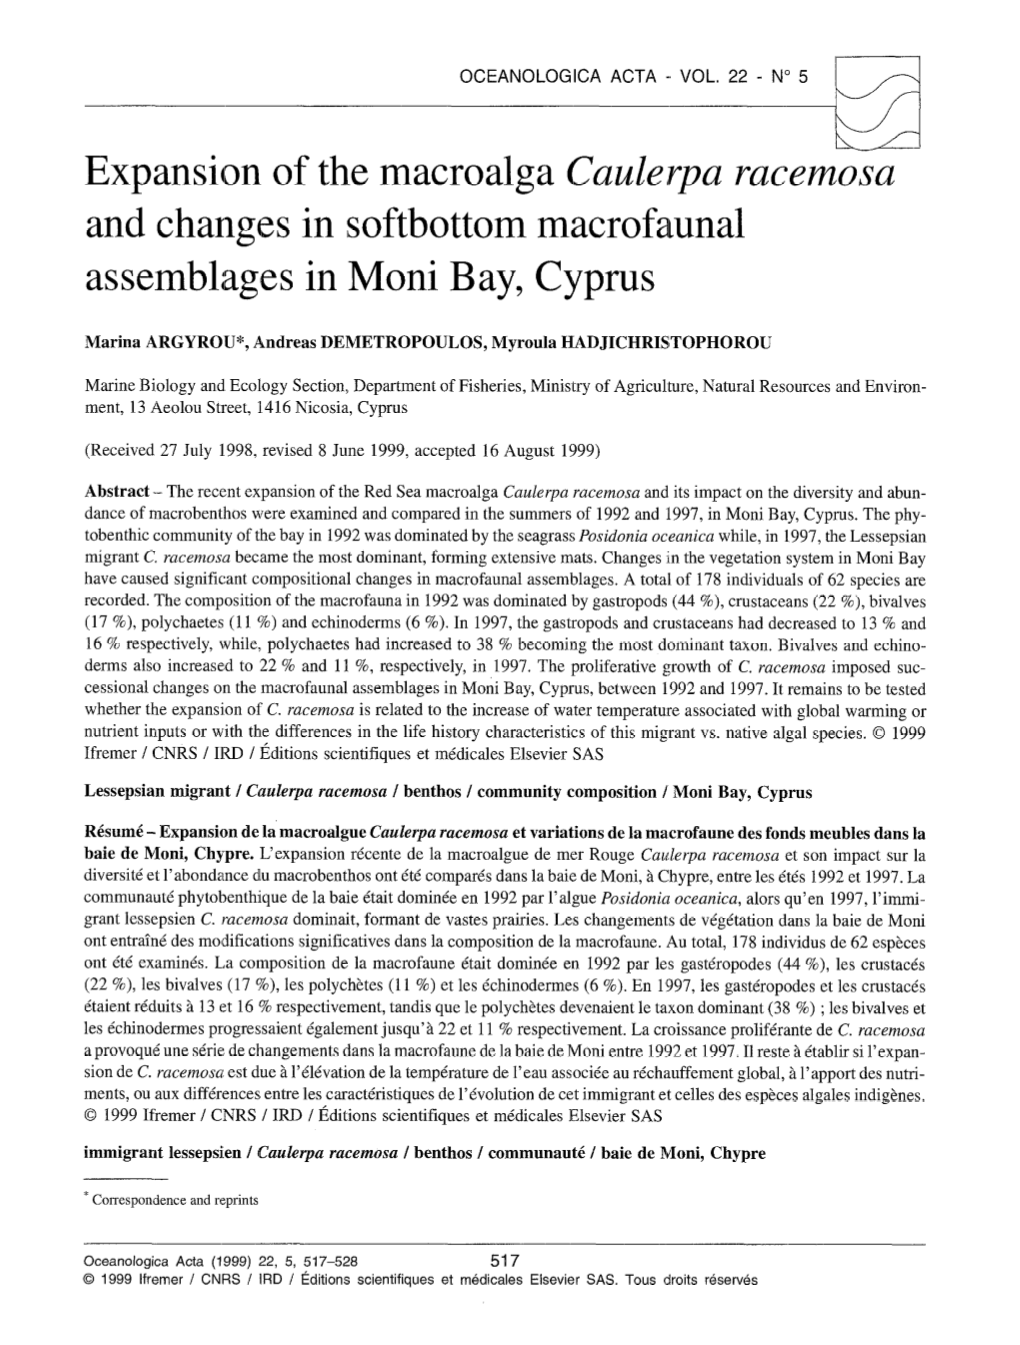 Expansion of the Macroalga Cadetpa Racemosa and Changes in Softbottom Macrofalunal Assemblages in Moni Bay, Cyprus